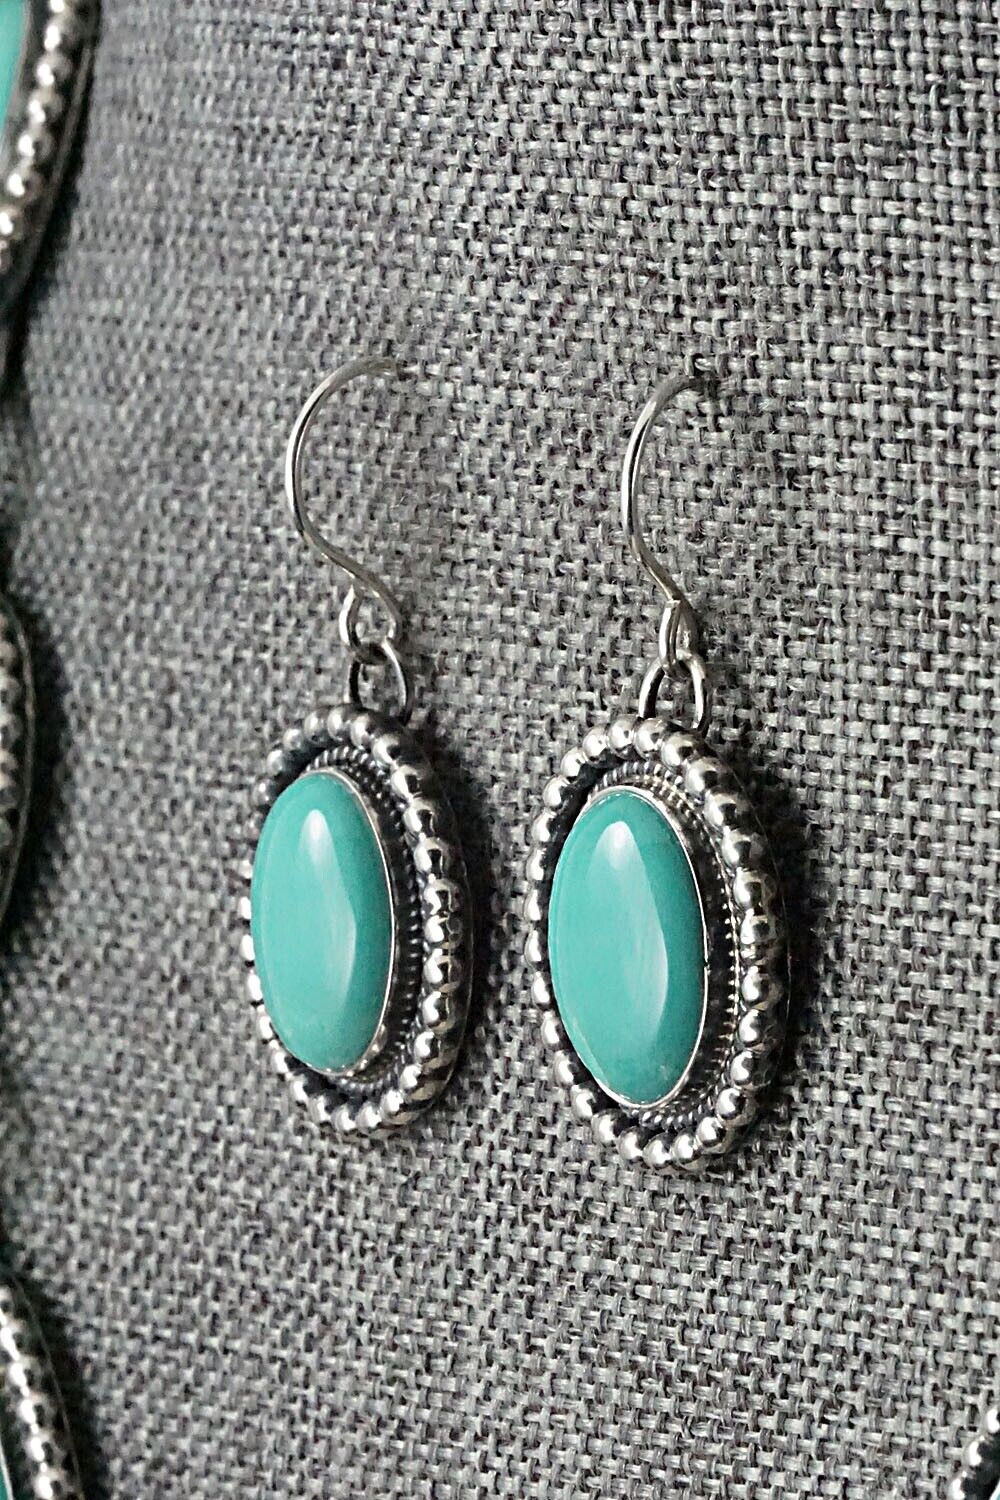 Turquoise & Sterling Silver Necklace and Earrings Set - Annie Hoskie